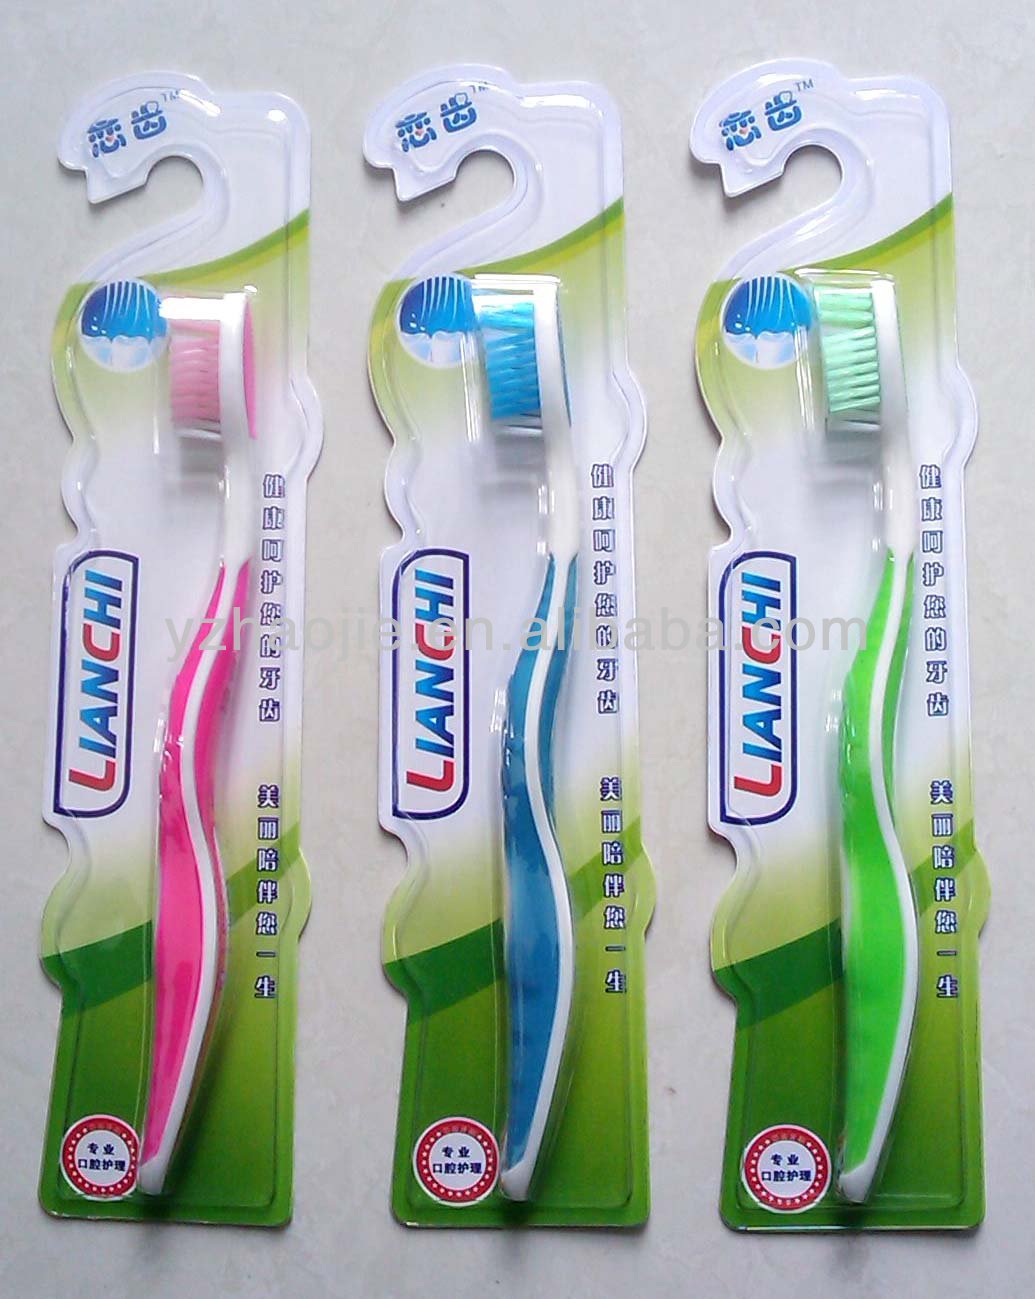 Toothbrush And Toothpaste. See larger image: Hotel Disposable Adult Toothbrush with Toothpaste. Add to My Favorites. Add to My Favorites. Add Product to Favorites